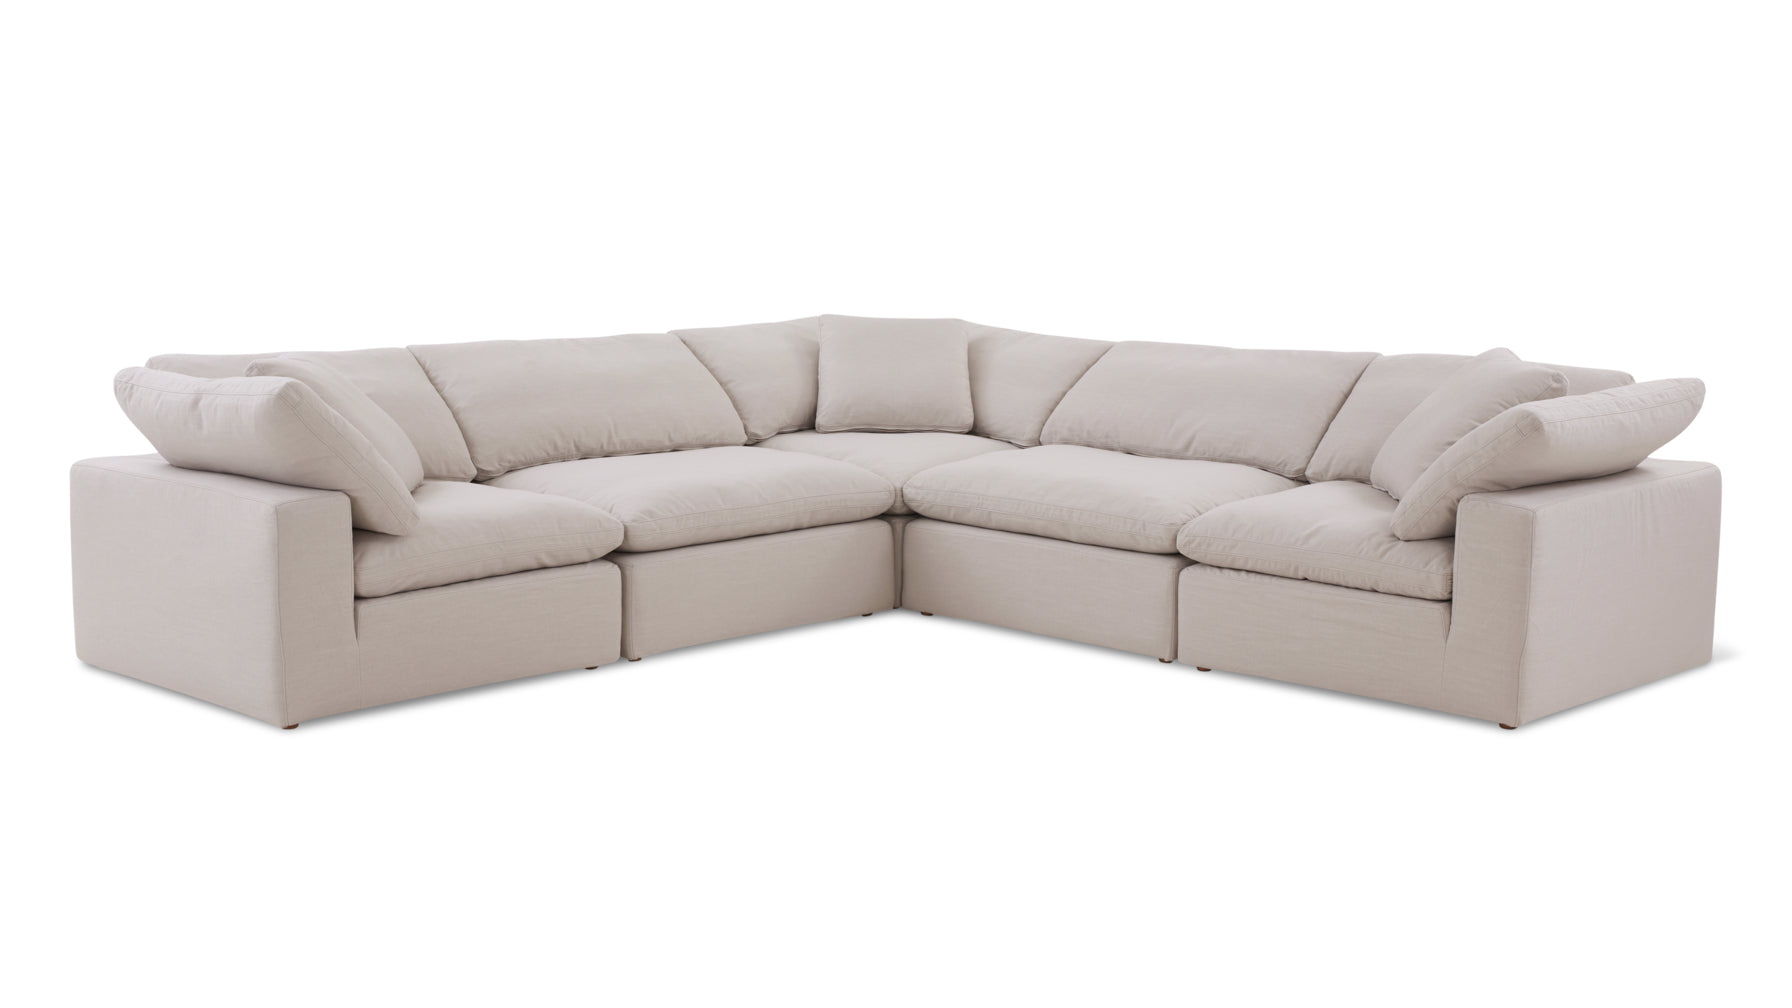 Movie Night™ 5-Piece Modular Sectional Closed, Large, Clay - Image 7